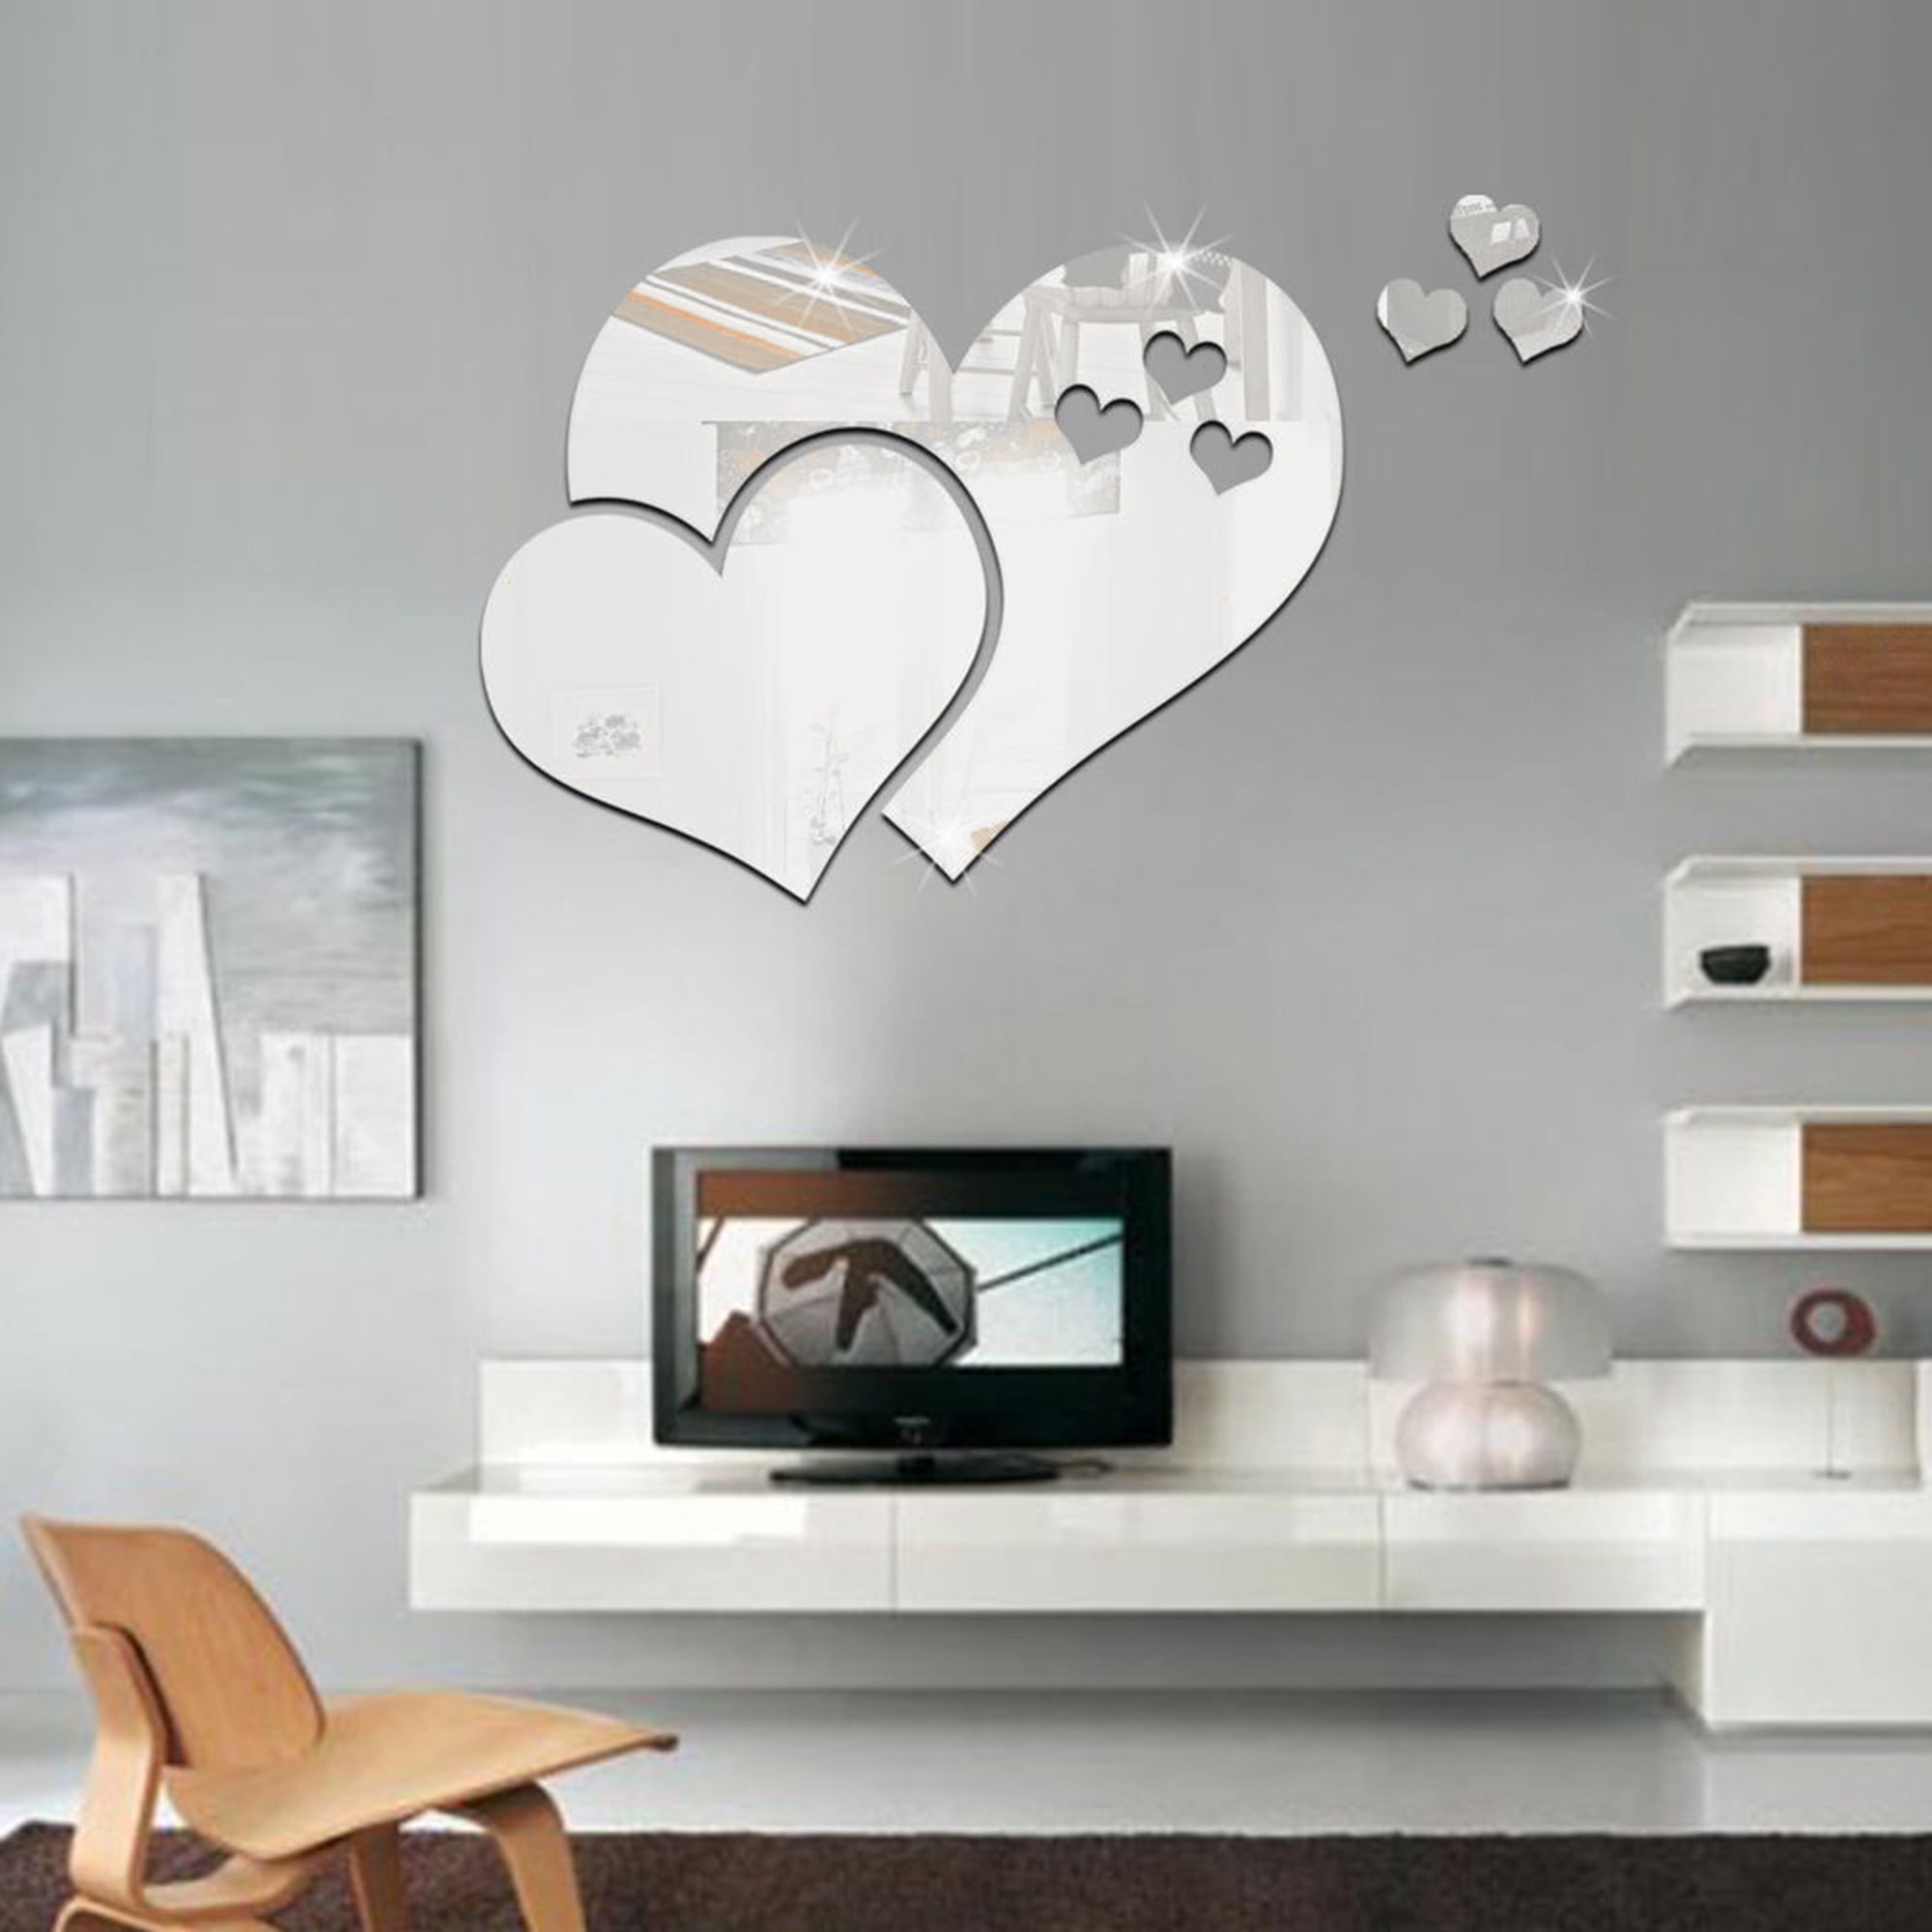 Details about   DIY Wall Stickers Adhesive Removable Art Decals Wallpaper Home Room New Decor